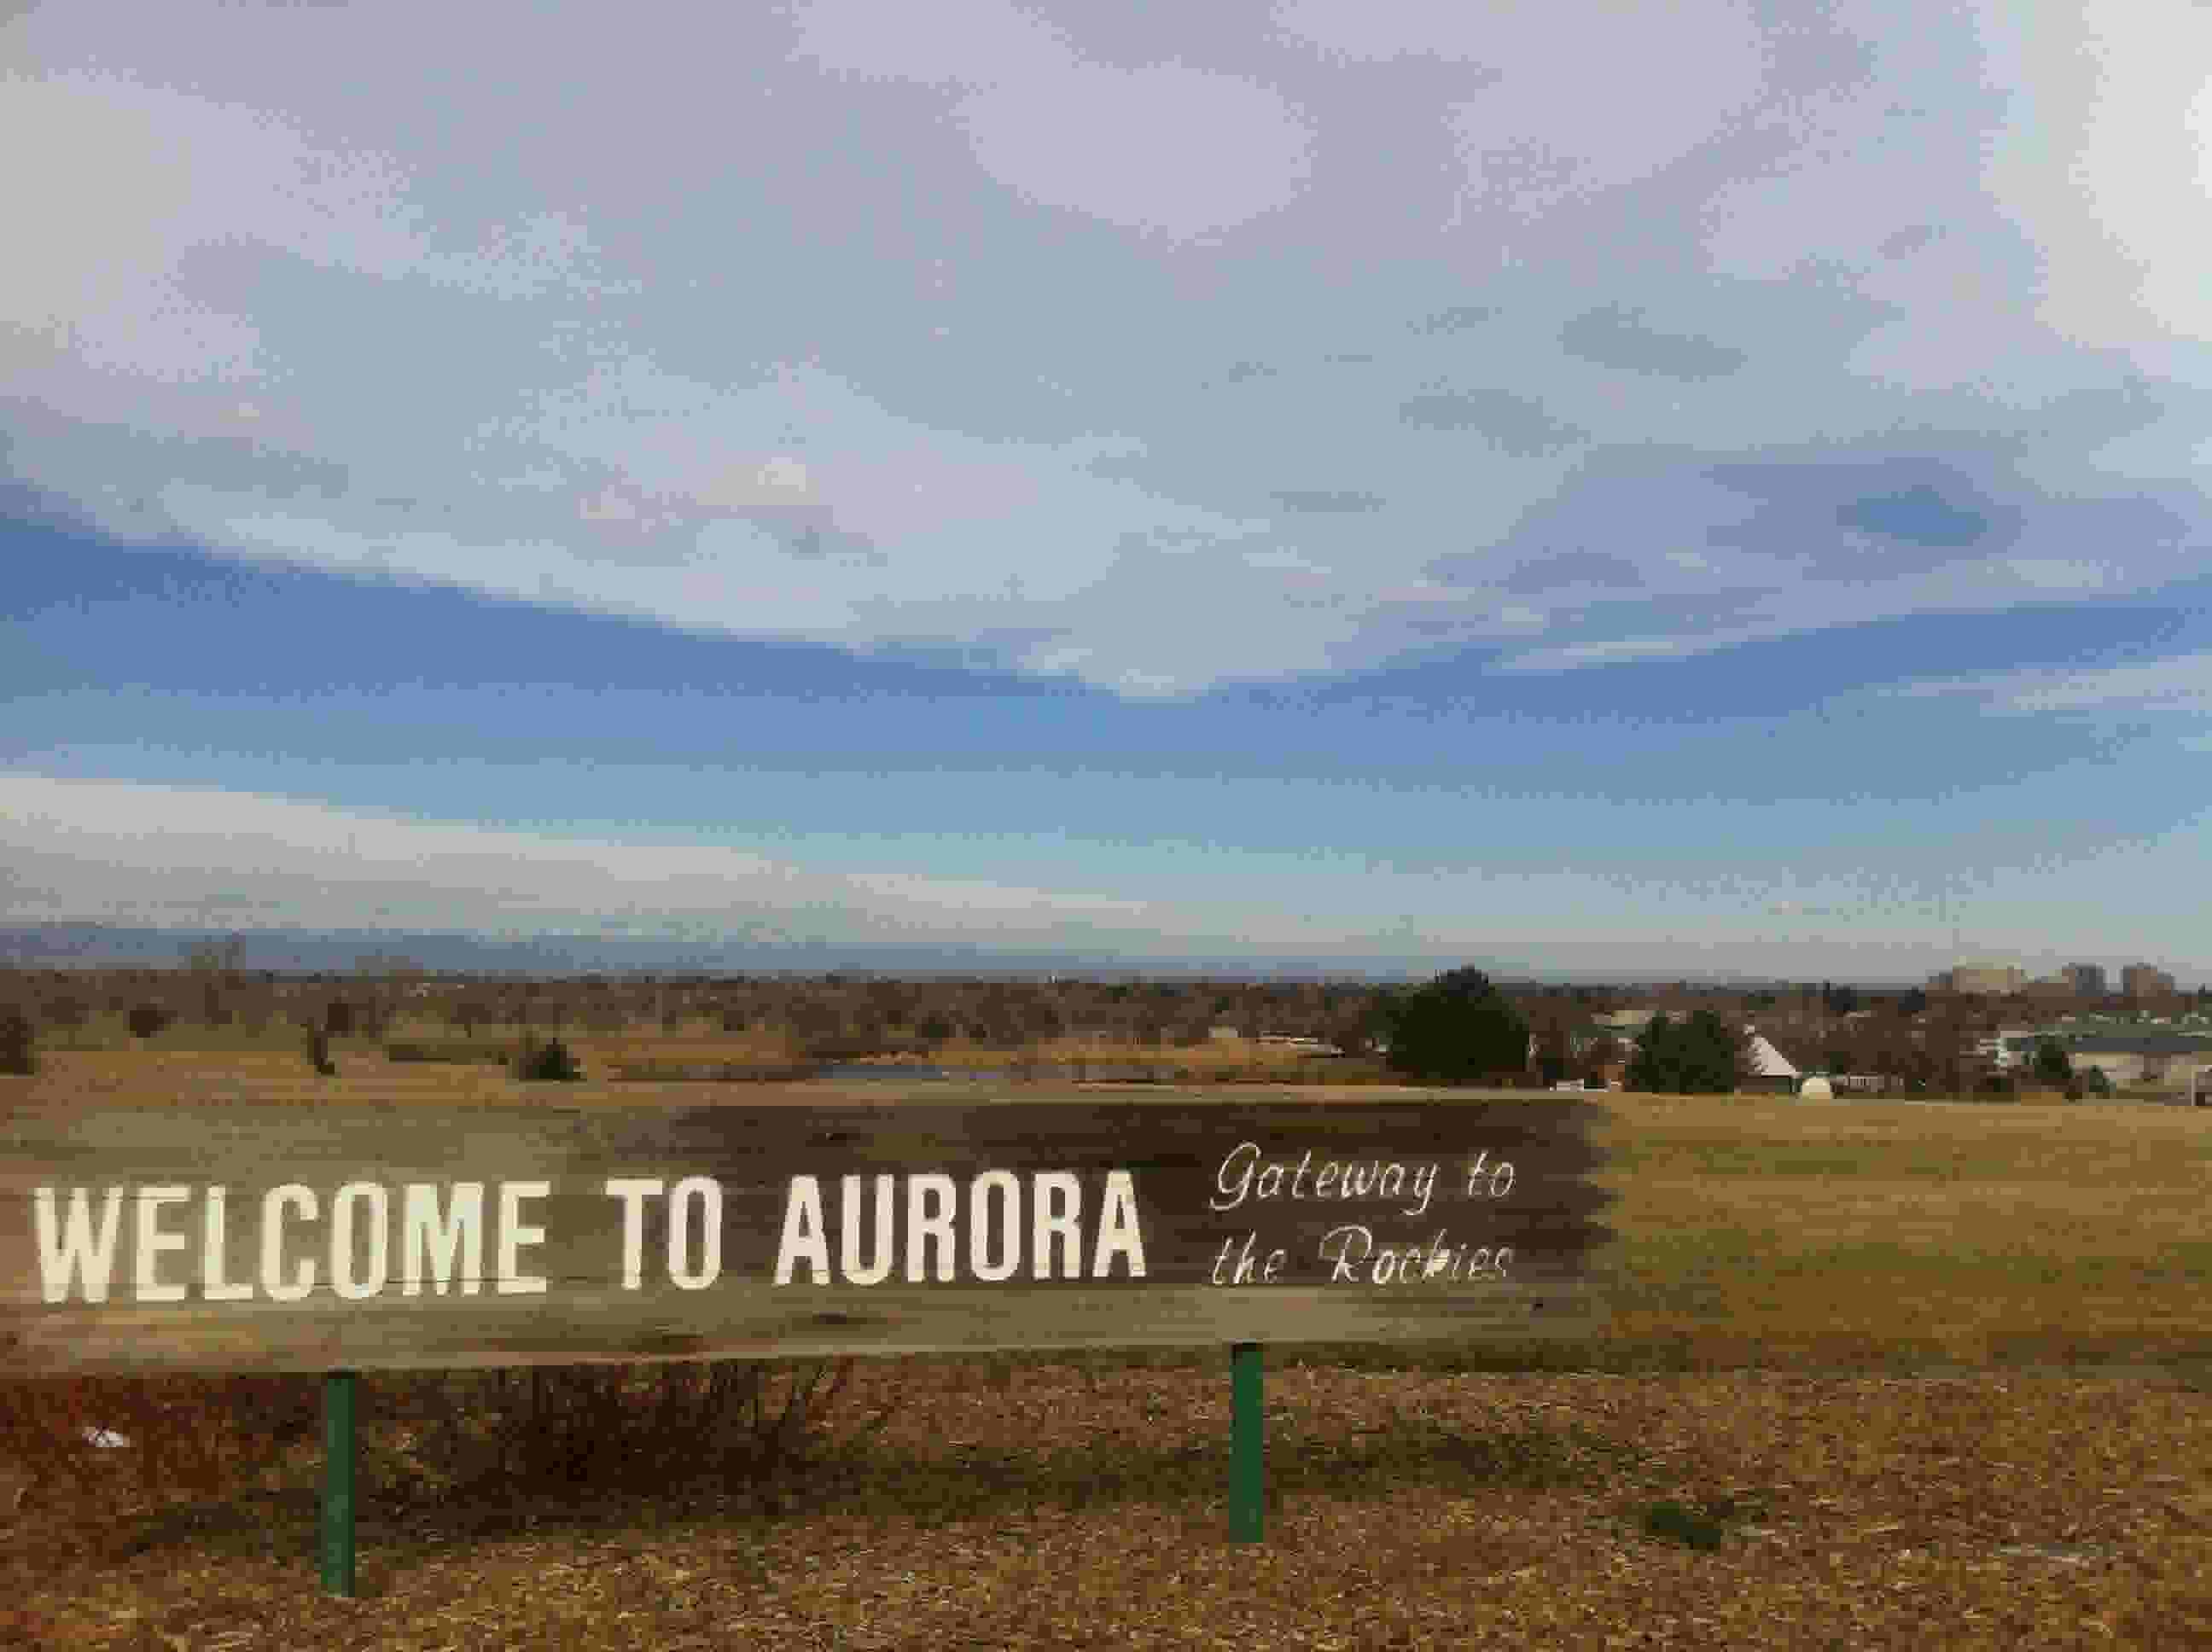 A photograph of a sign that reads "WELCOME TO AURORA: Gateway to the Rockies." The city of Aurora and the mountains are visible in the background.